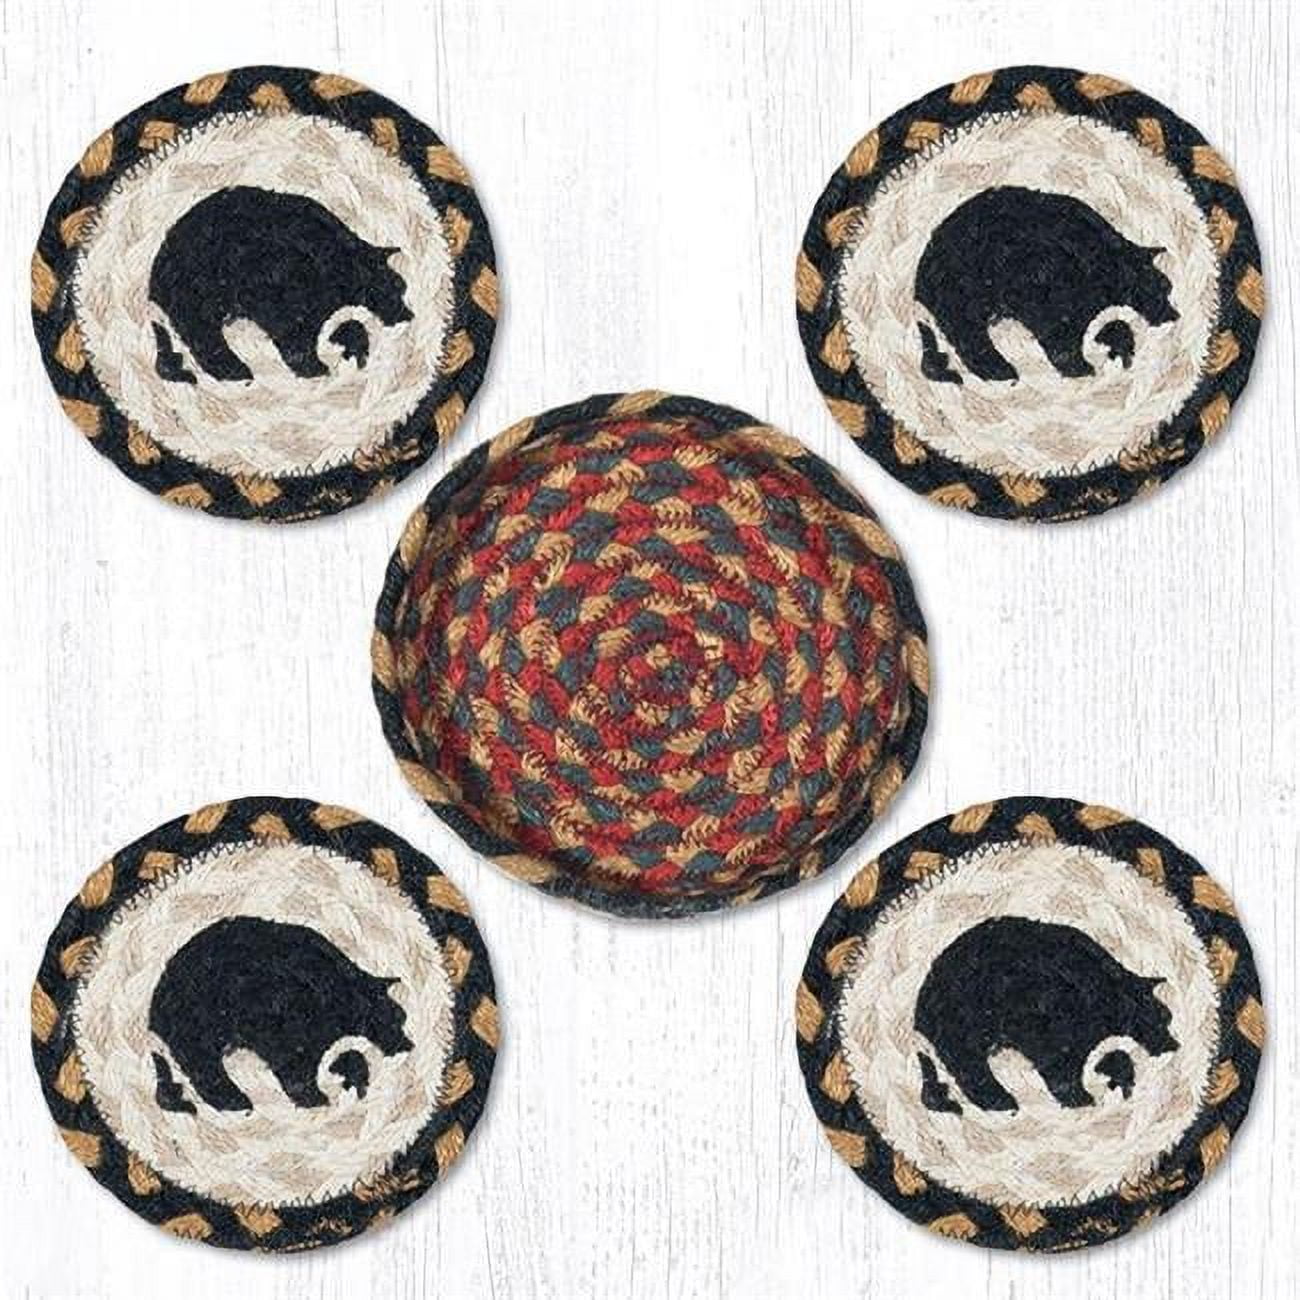 Picture of Capitol Importing 29-CB043BB 5 in. Black Bear Coaster Rugs Rug